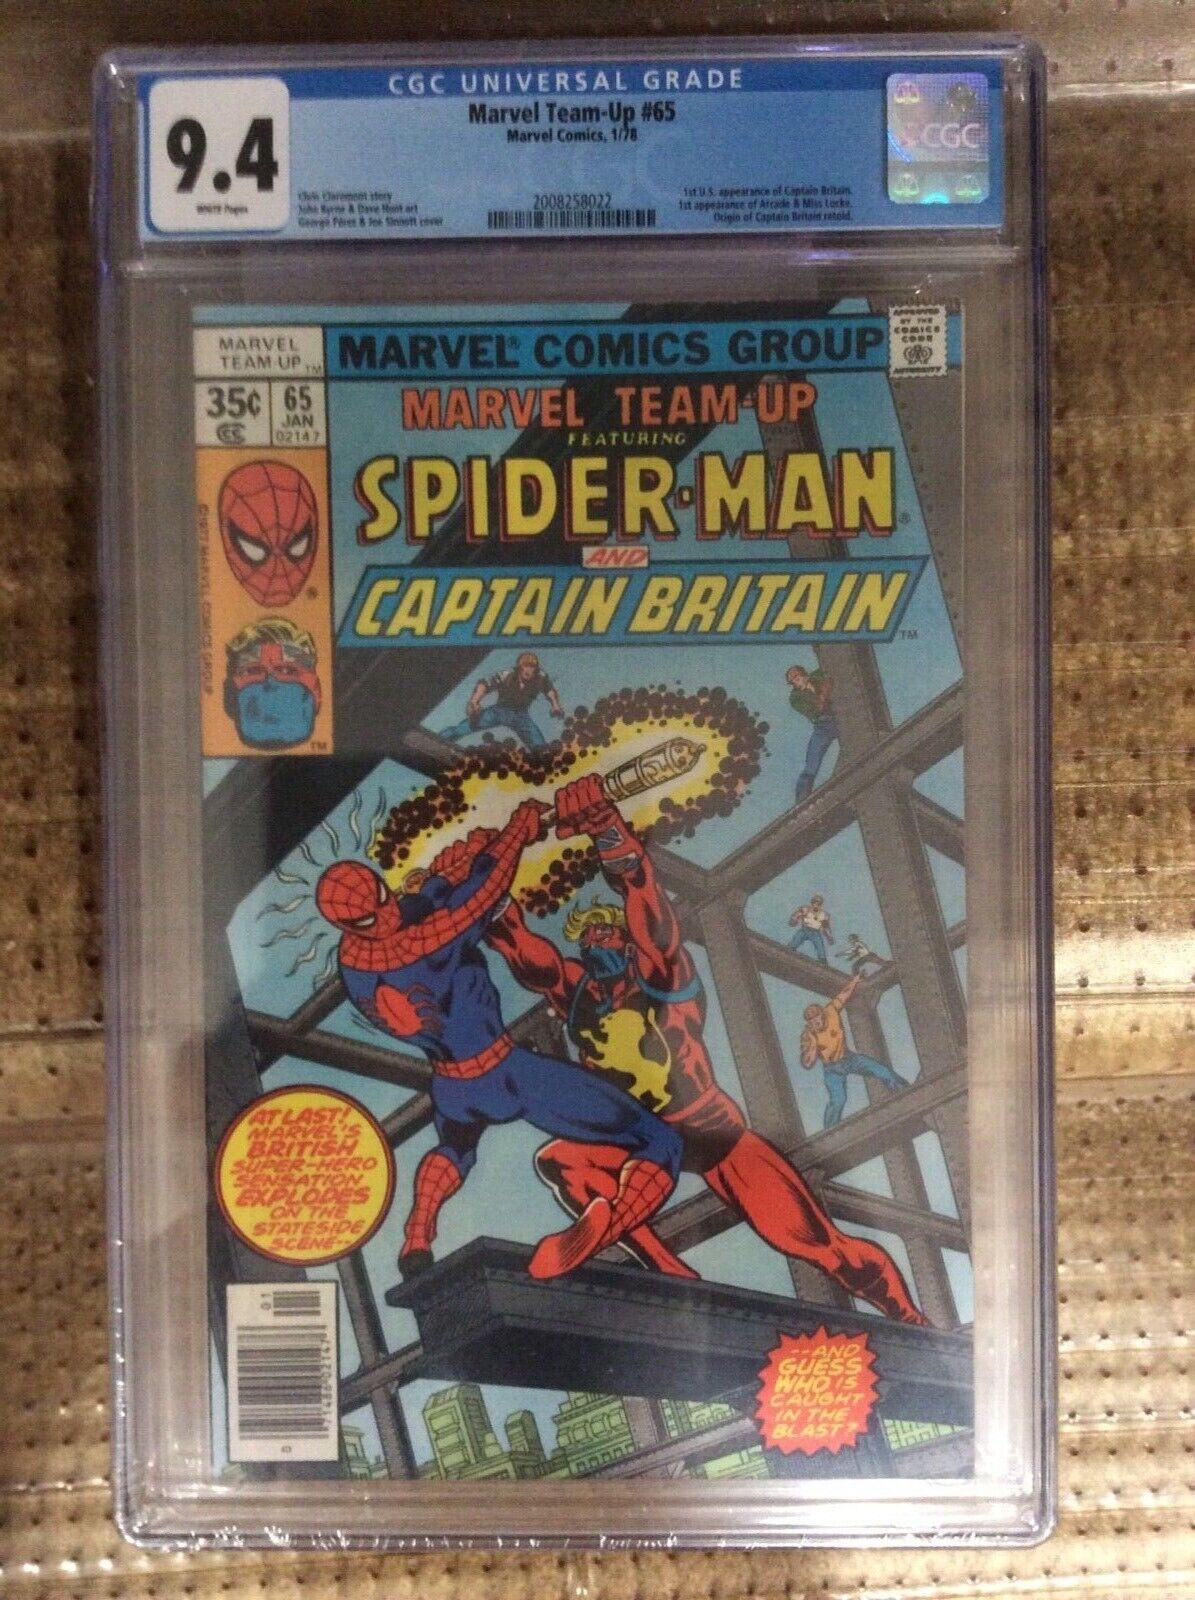 MARVEL TEAMUP 65 CGC 94 CGC NM First  1st US Appearance Captain Britain